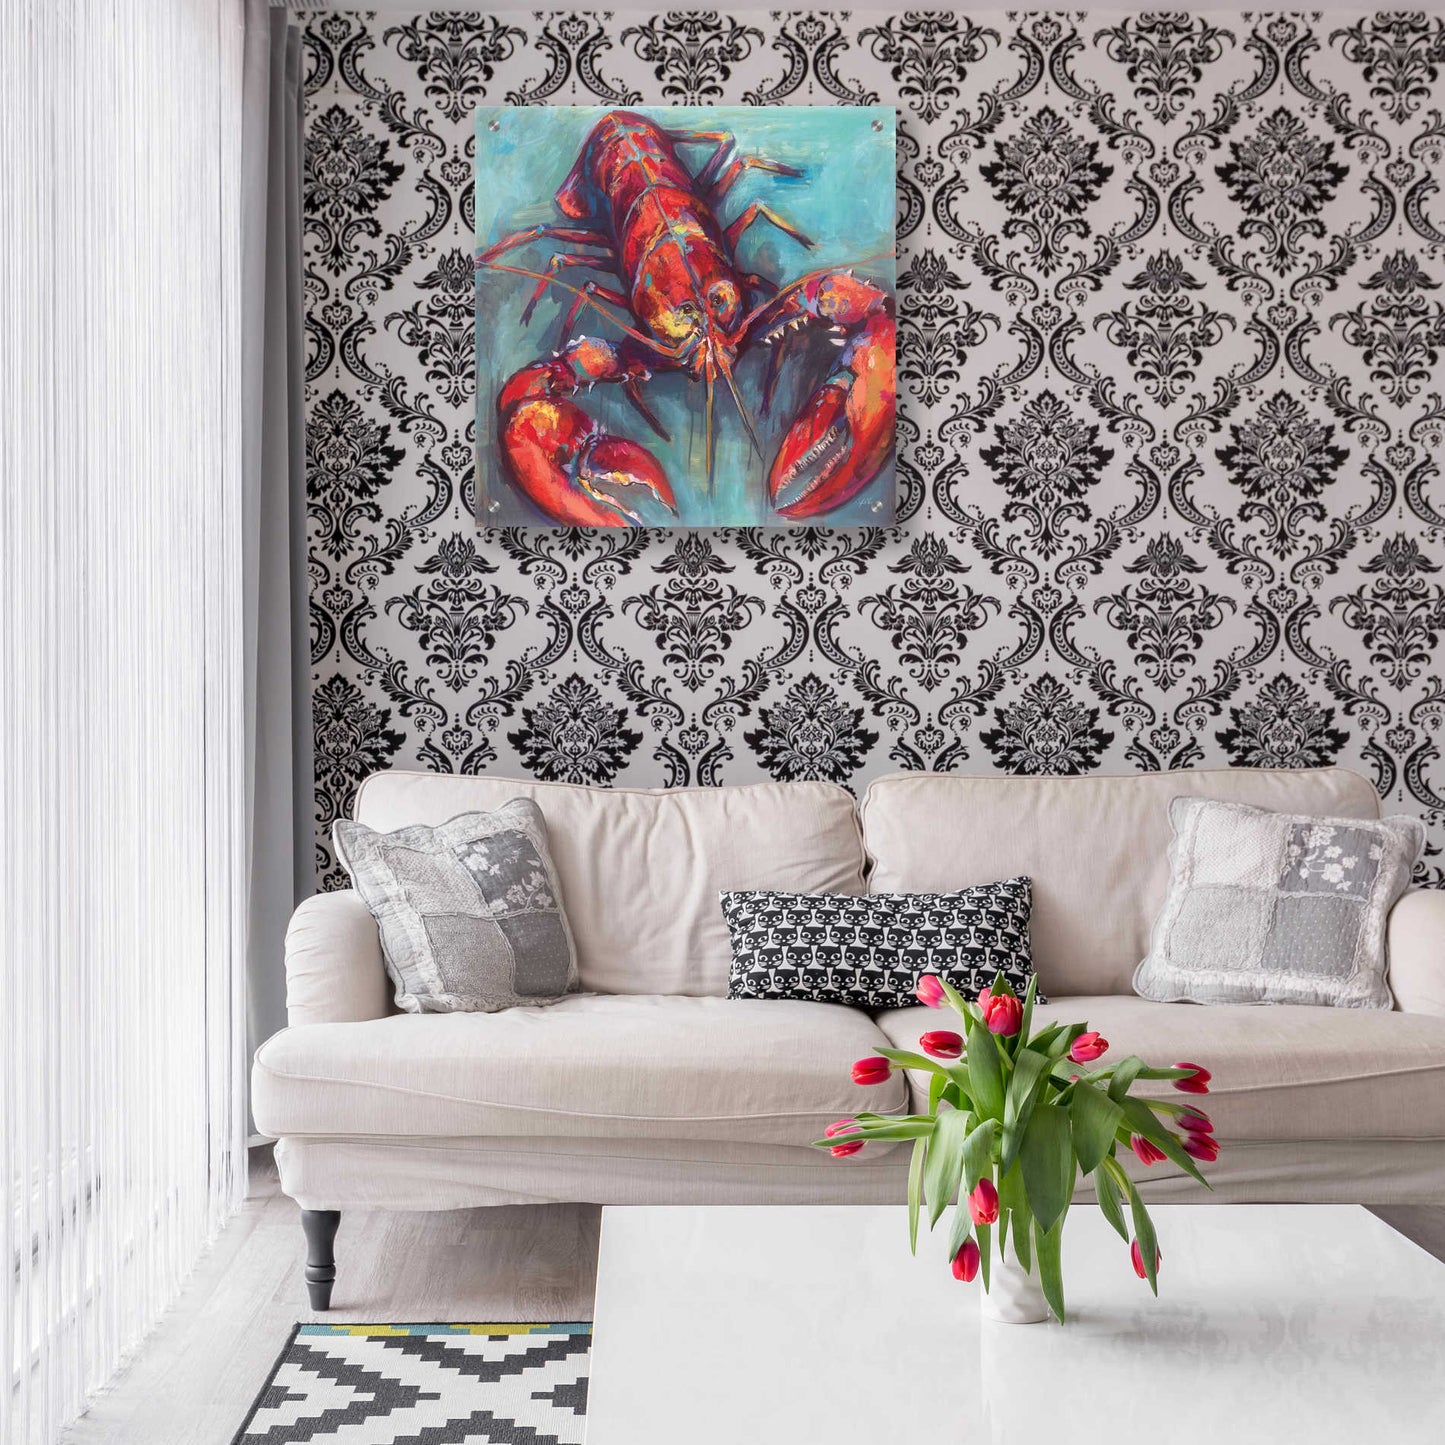 Epic Art 'Lobster' by Jeanette Vertentes, Acrylic Glass Wall Art,24x24